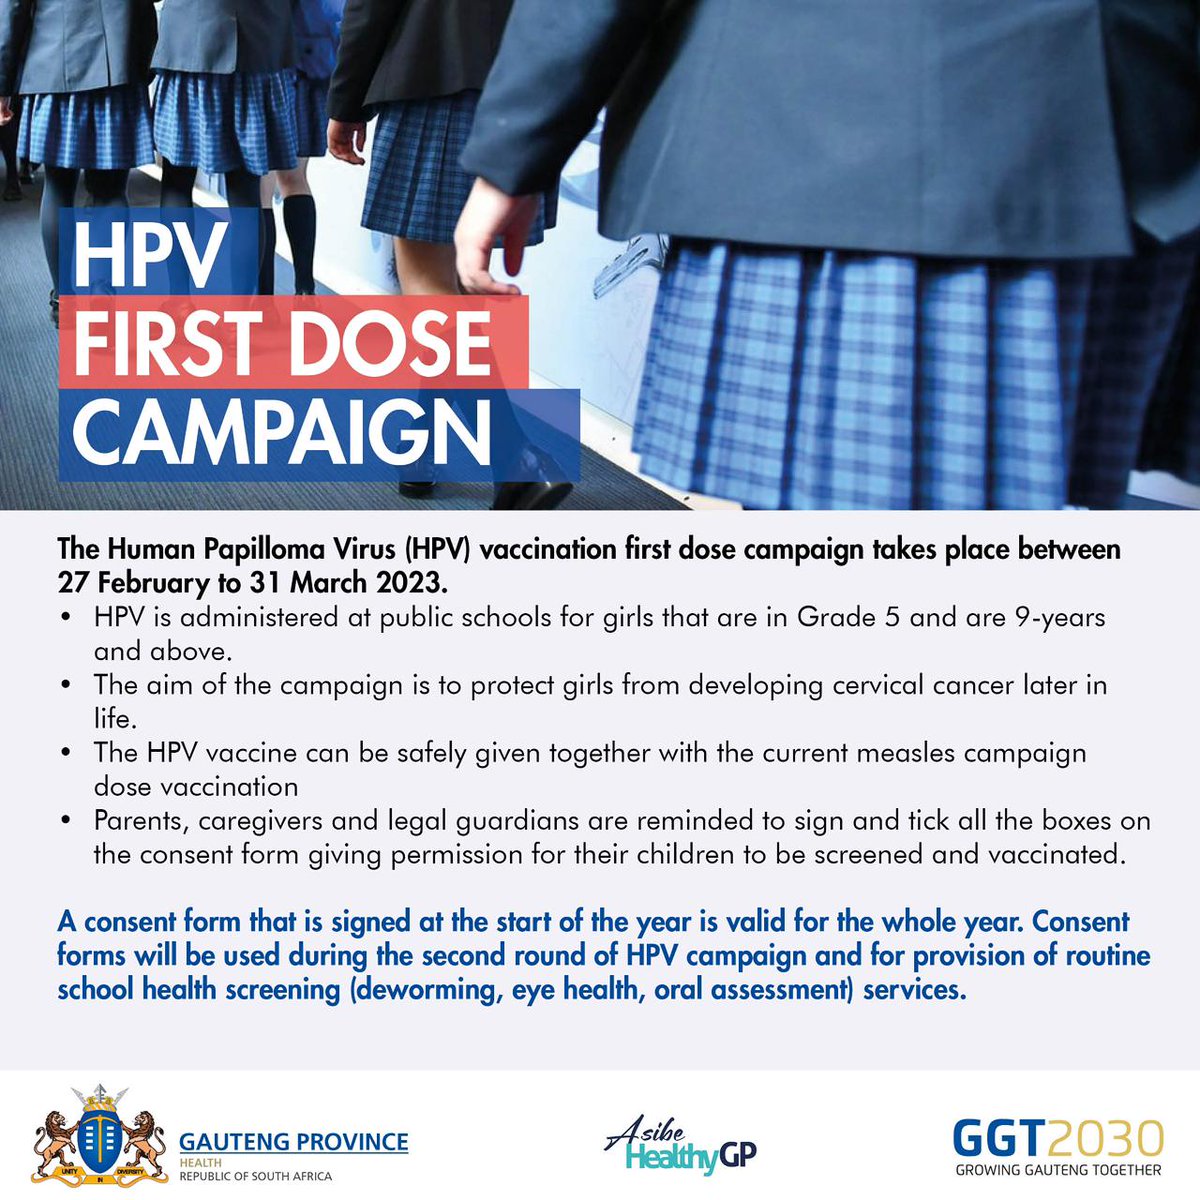 HPV is administered at public schools for girls that are in grade 5 and are 9 years old and above.  Parents, caregivers and legal guardians are reminded to give consent for their children to get vaccinated.
#AsibeHealthyGP #HPVVaccination